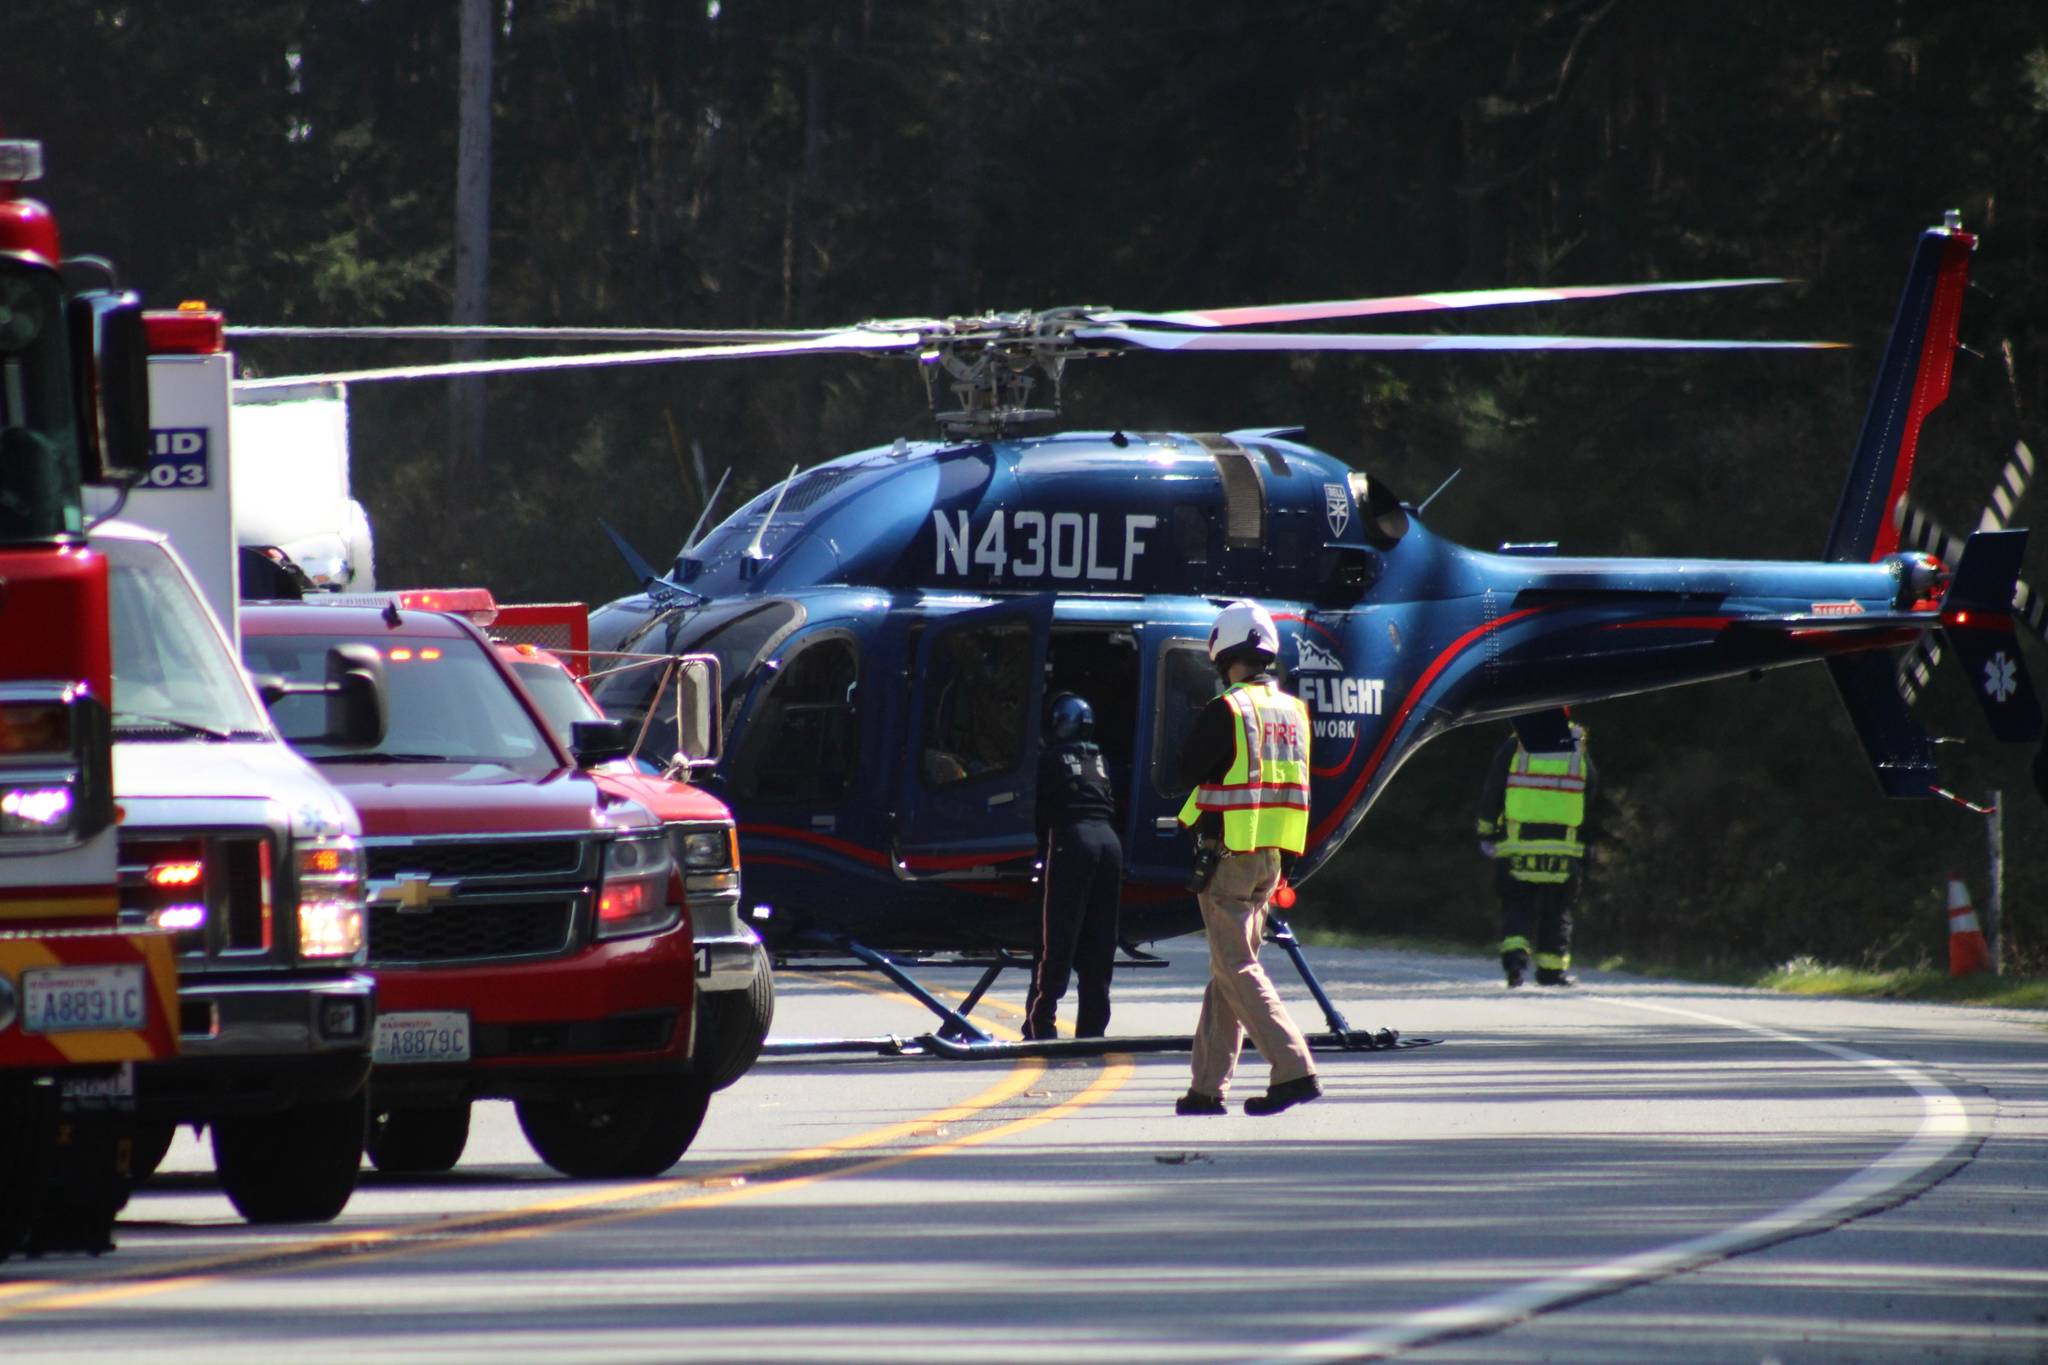 A LifeFlight Network helicopter was called in after a 44-year-old Oak Harbor woman lost control of her car and crossed the center line on Highway 20, crashing head-on into another driver near Coupeville Wednesday. The woman did not survive the crash. Photo by Bryan Fick/WestCoast Fire Media